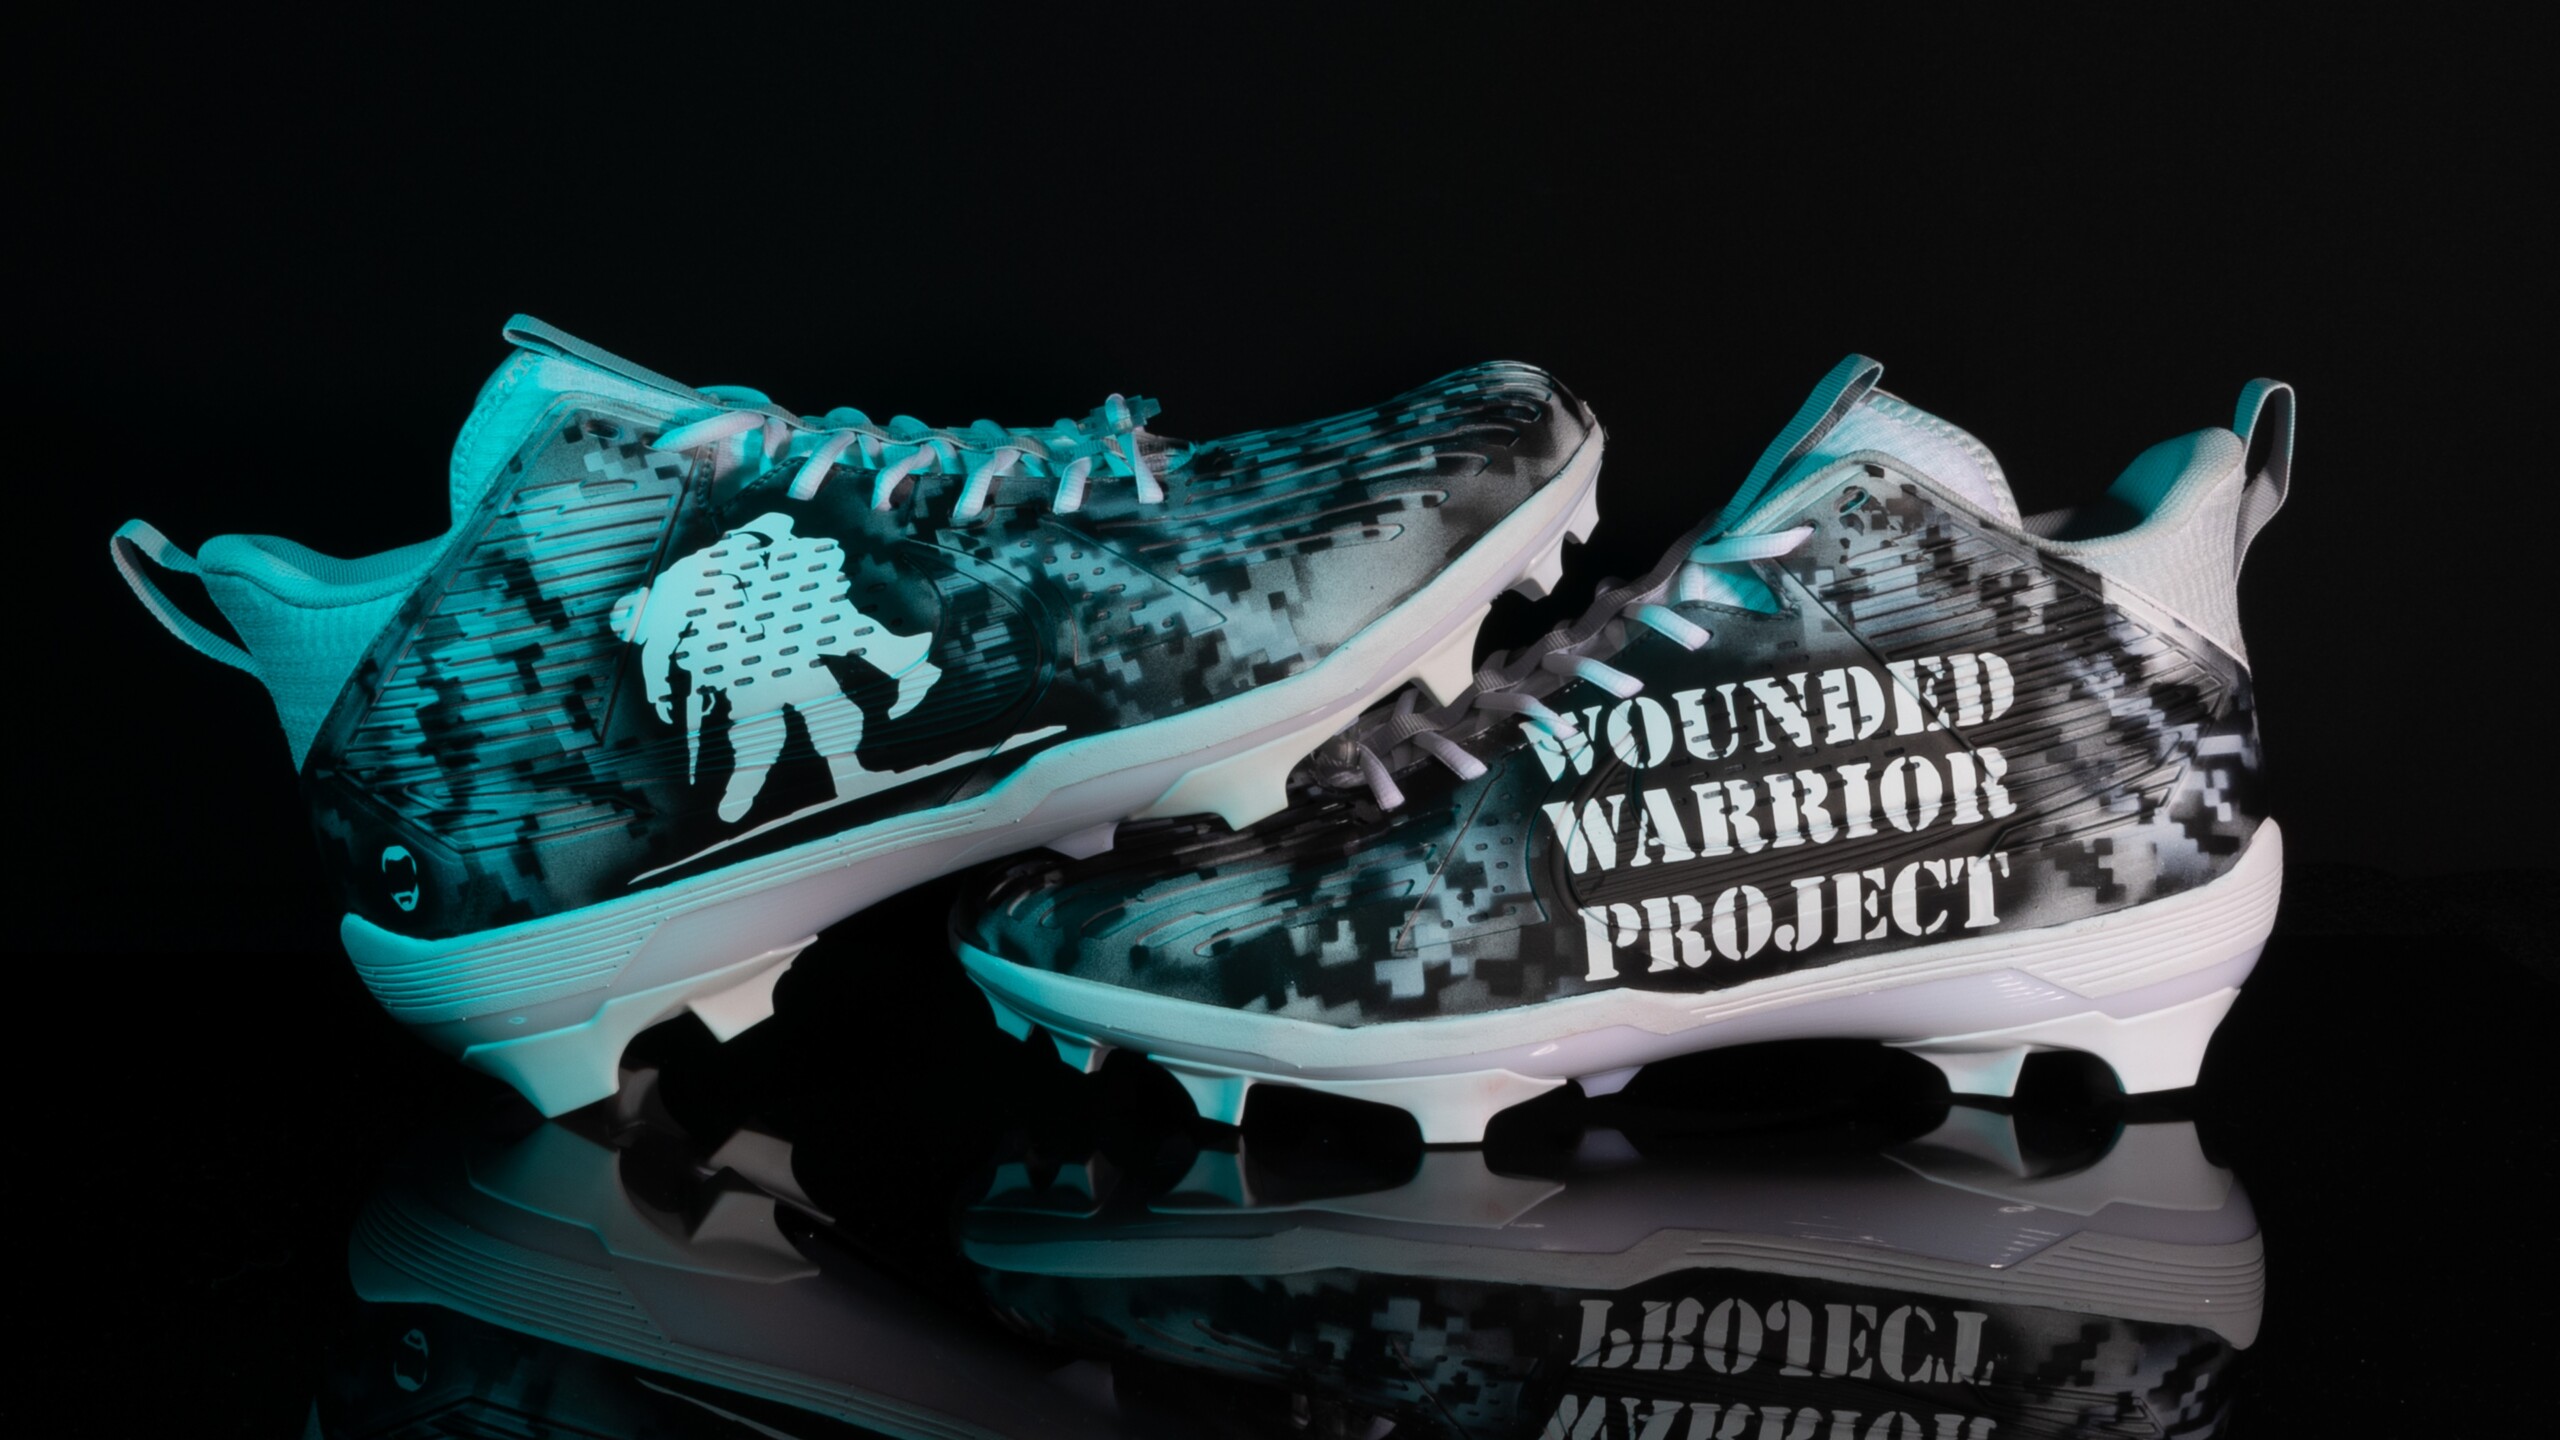 Featured image for “Jags’ cleats put Wounded Warrior Project in spotlight”